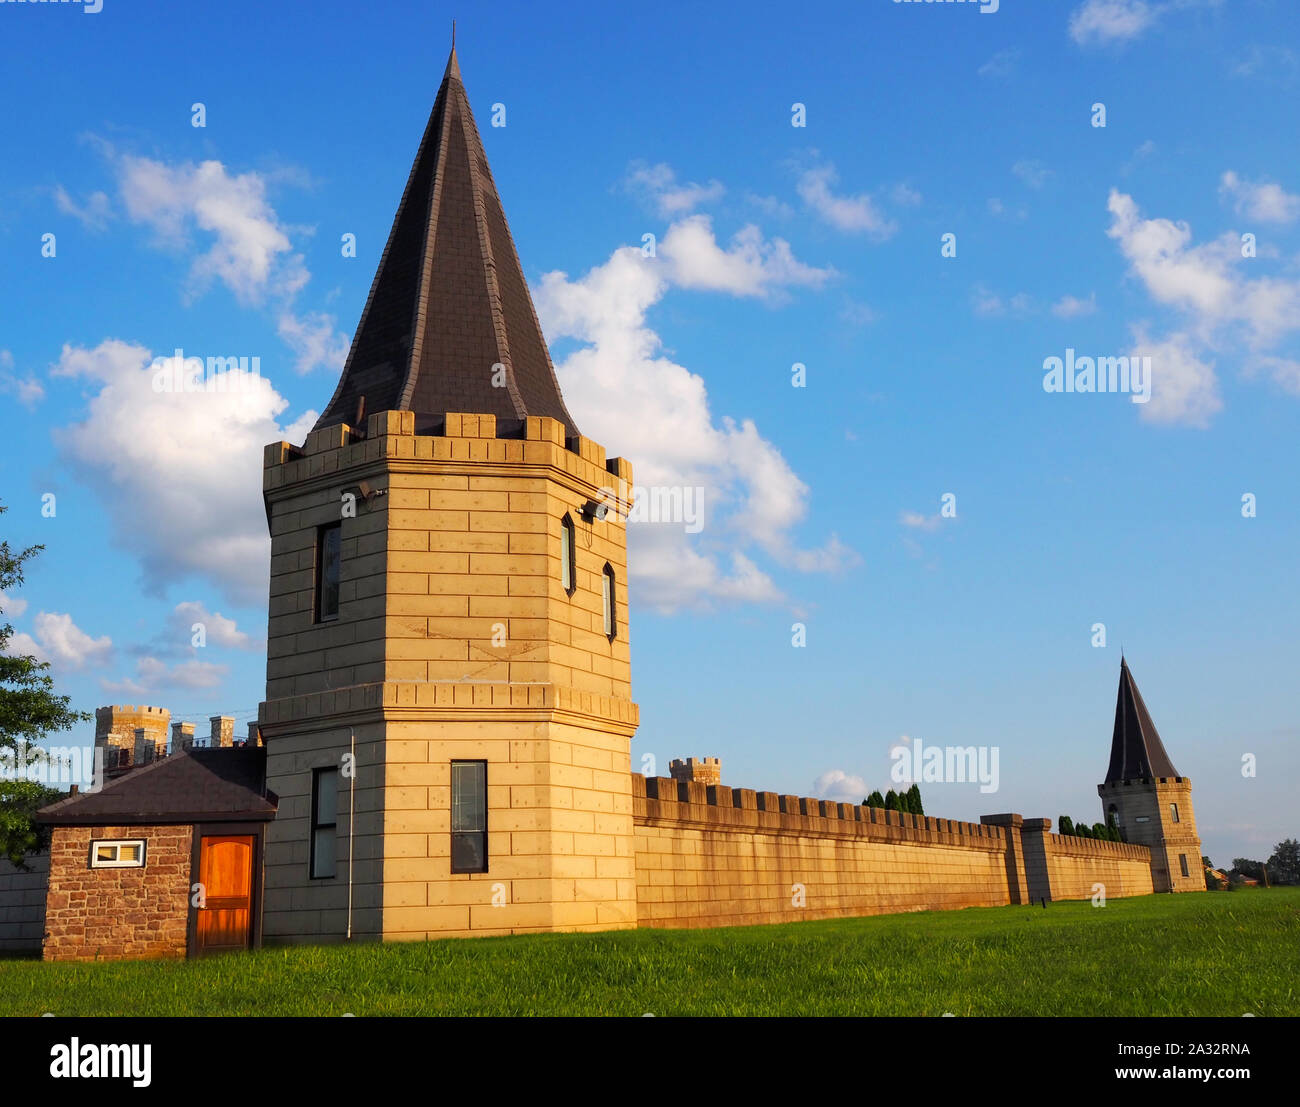 A turret marks the corner of large castle sprawling into the background surrounded by green grass and a vibrant blue sky with wispy clouds. Stock Photo